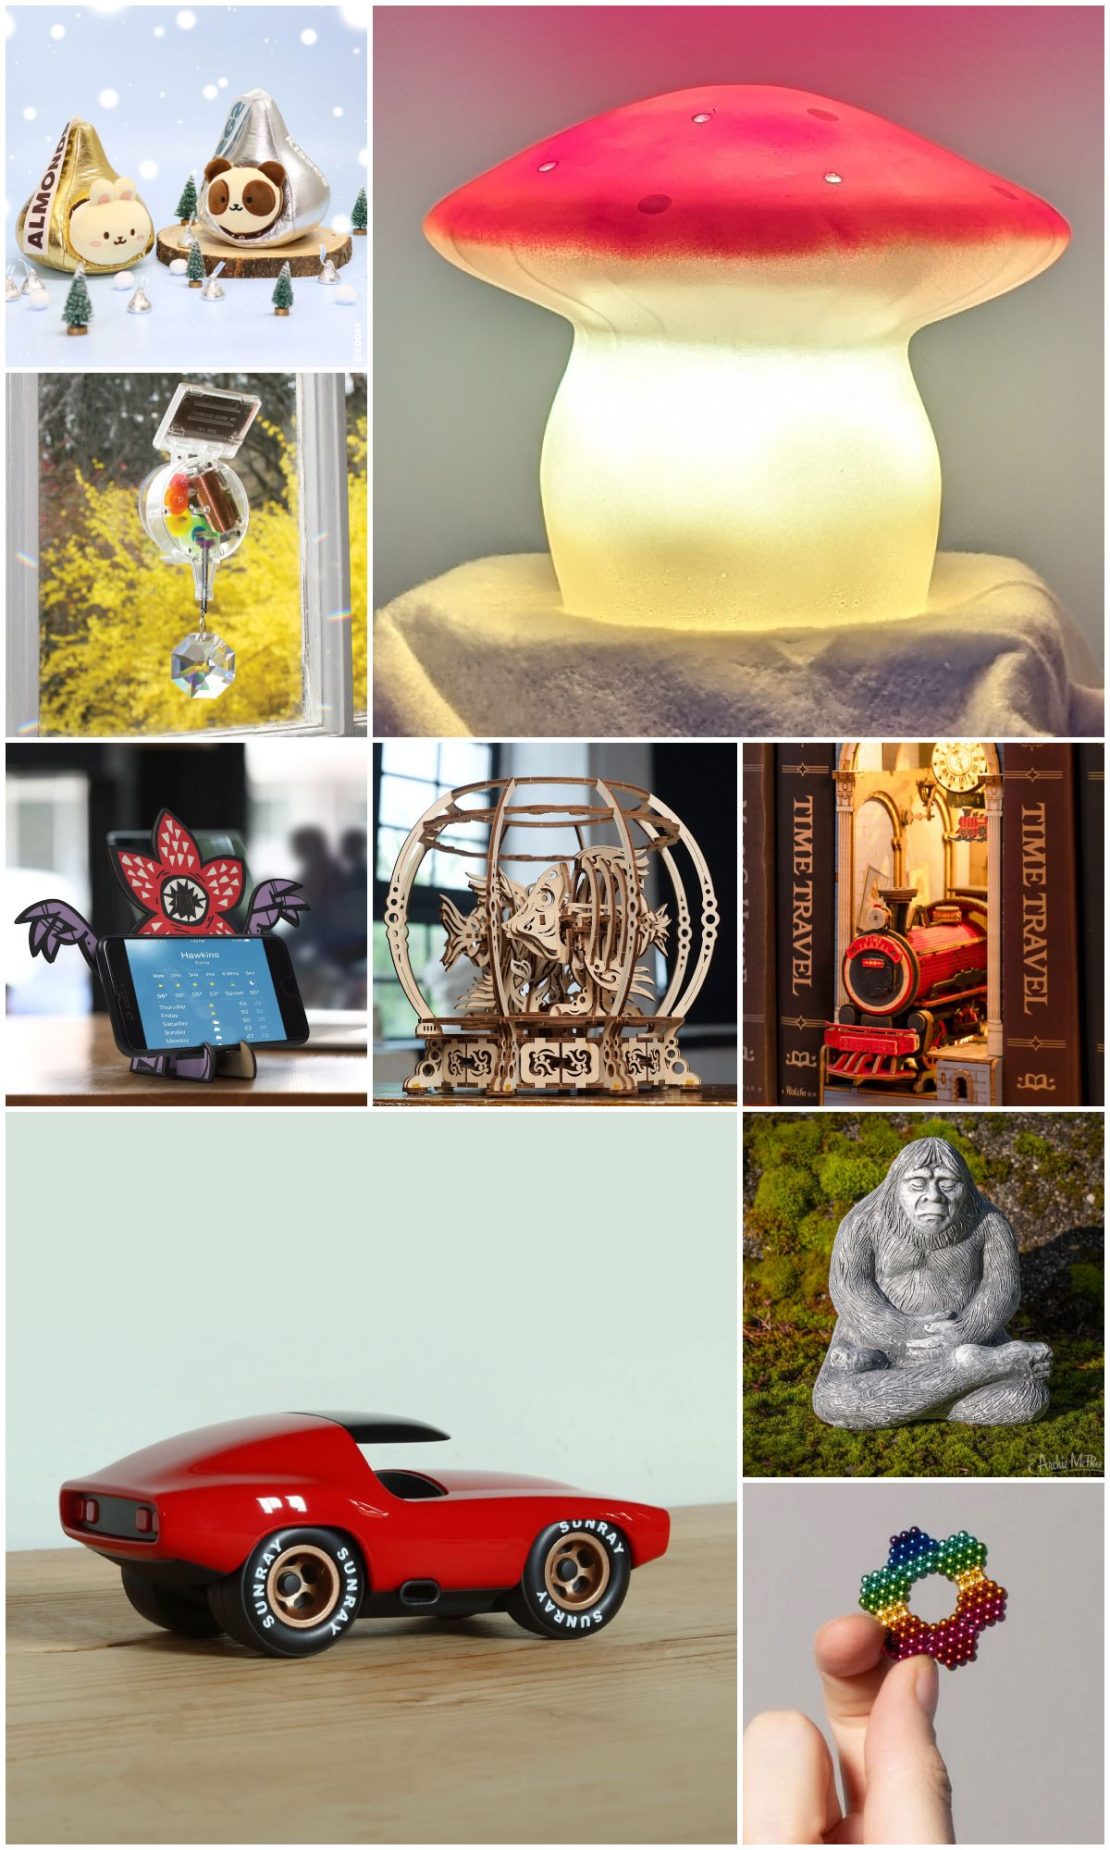 Mushroom lamps, intriguing desk toys, magical miniatures, and more!